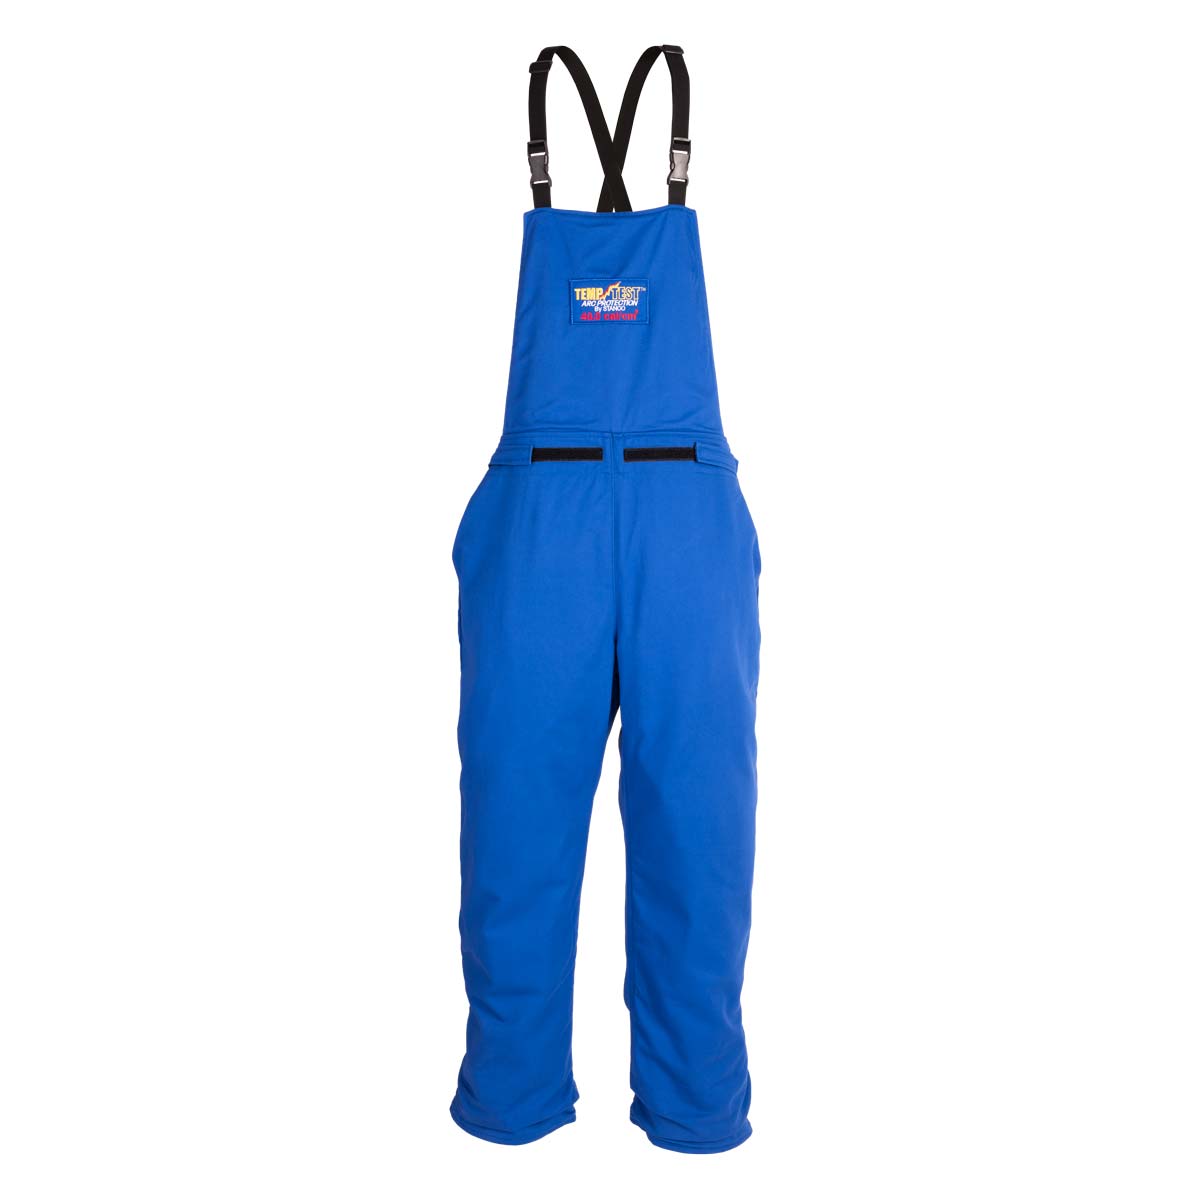 Temp Test Bib Overall for Arc Flash protection